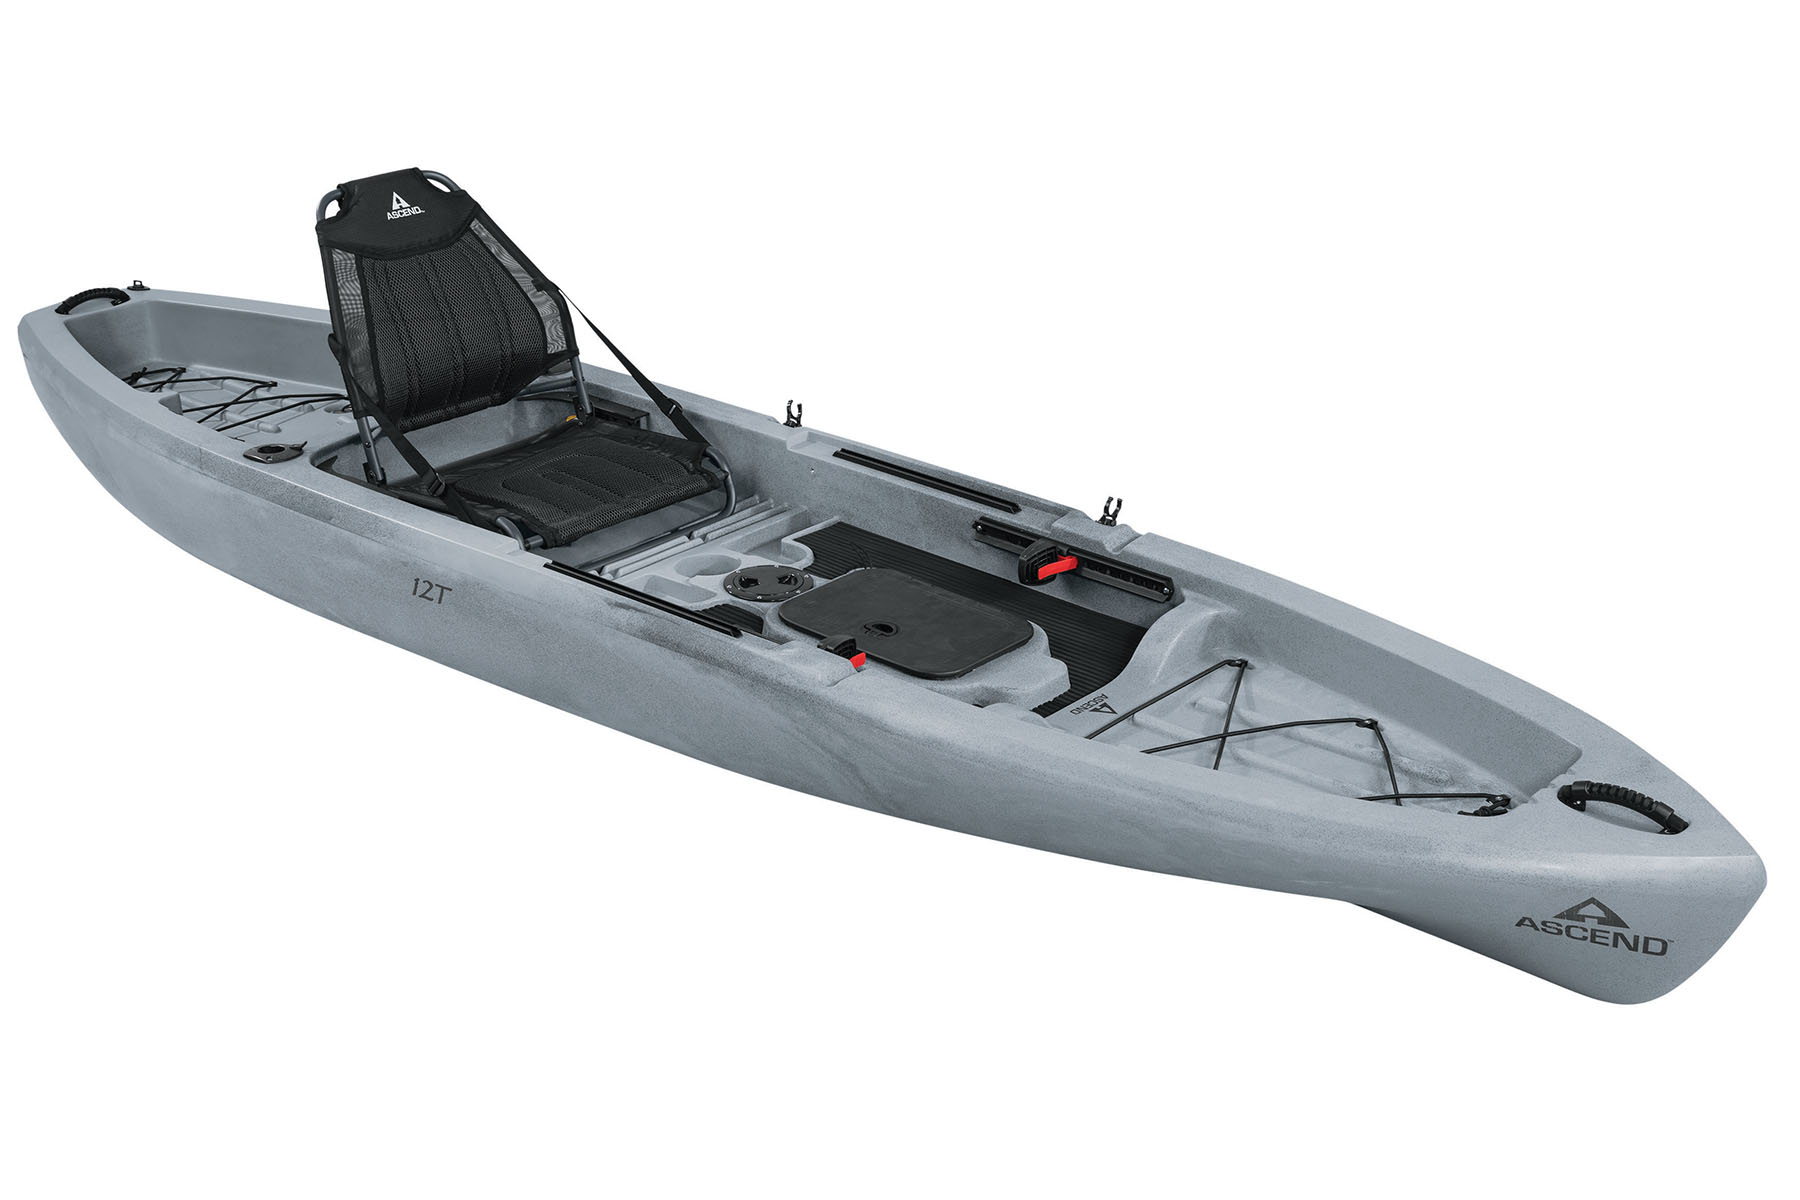 The Best Sit-in Fishing Kayaks – Why Choose?